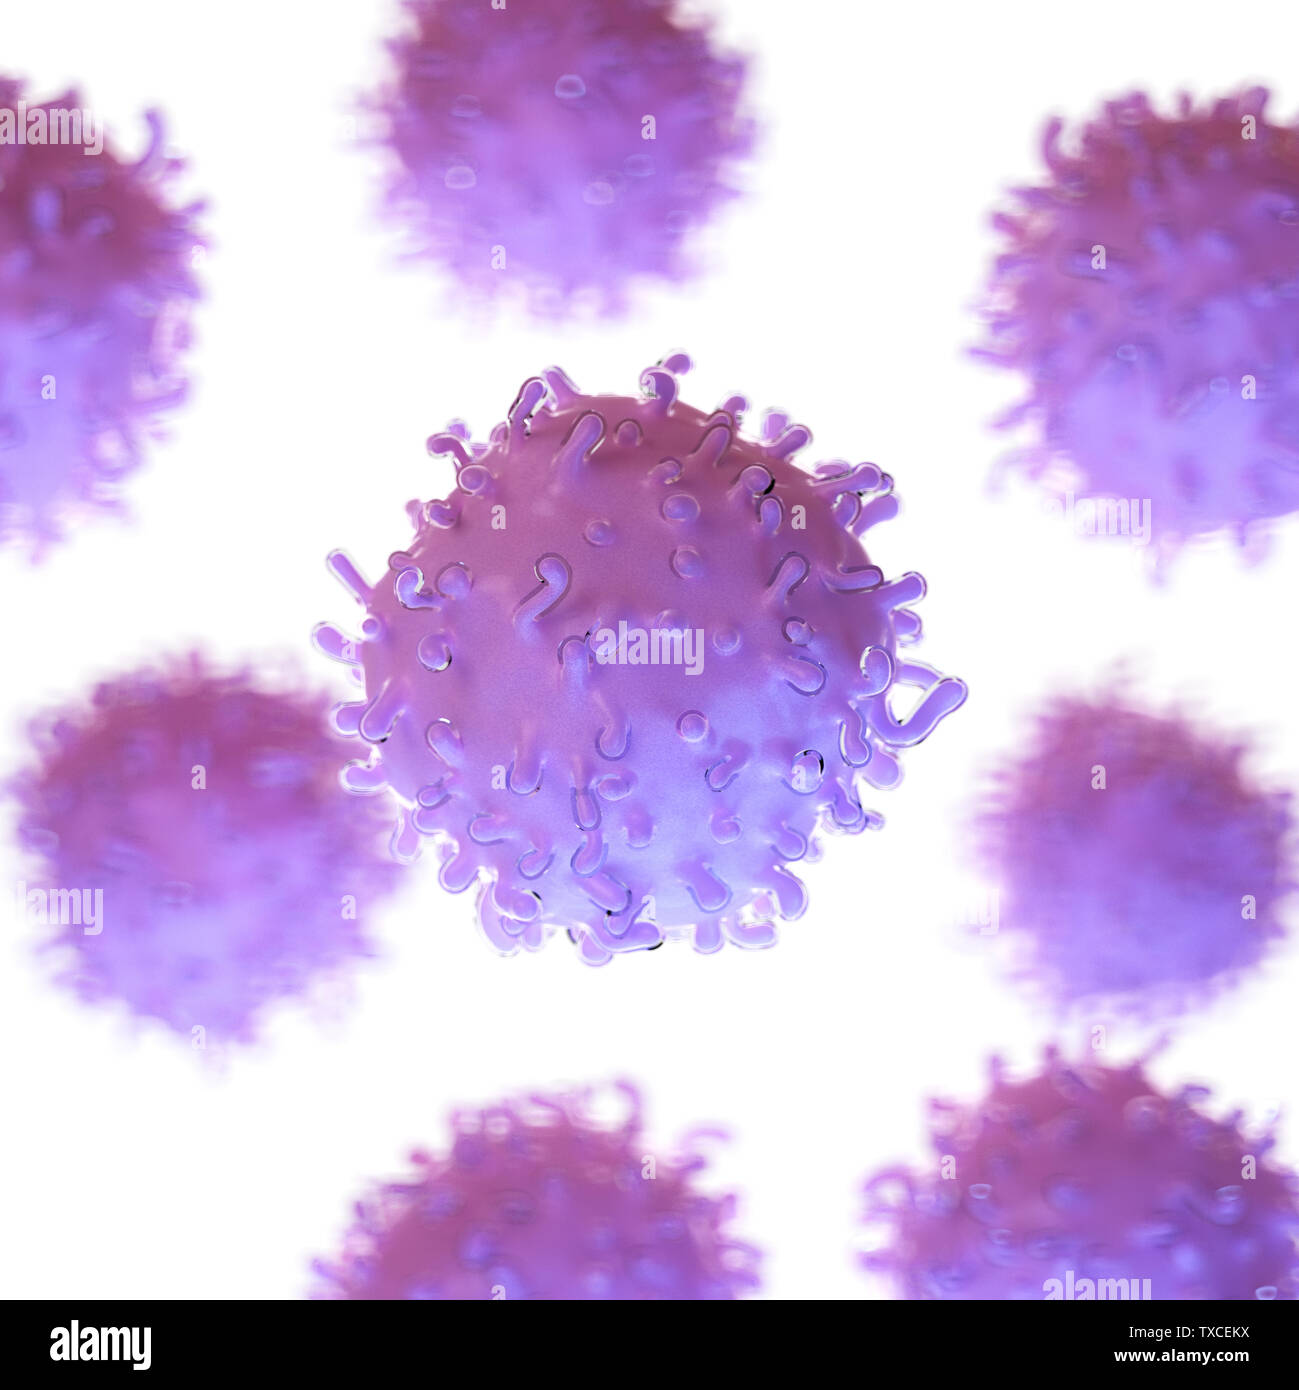 3d rendered, medically accurate illustration of stem cells Stock Photo